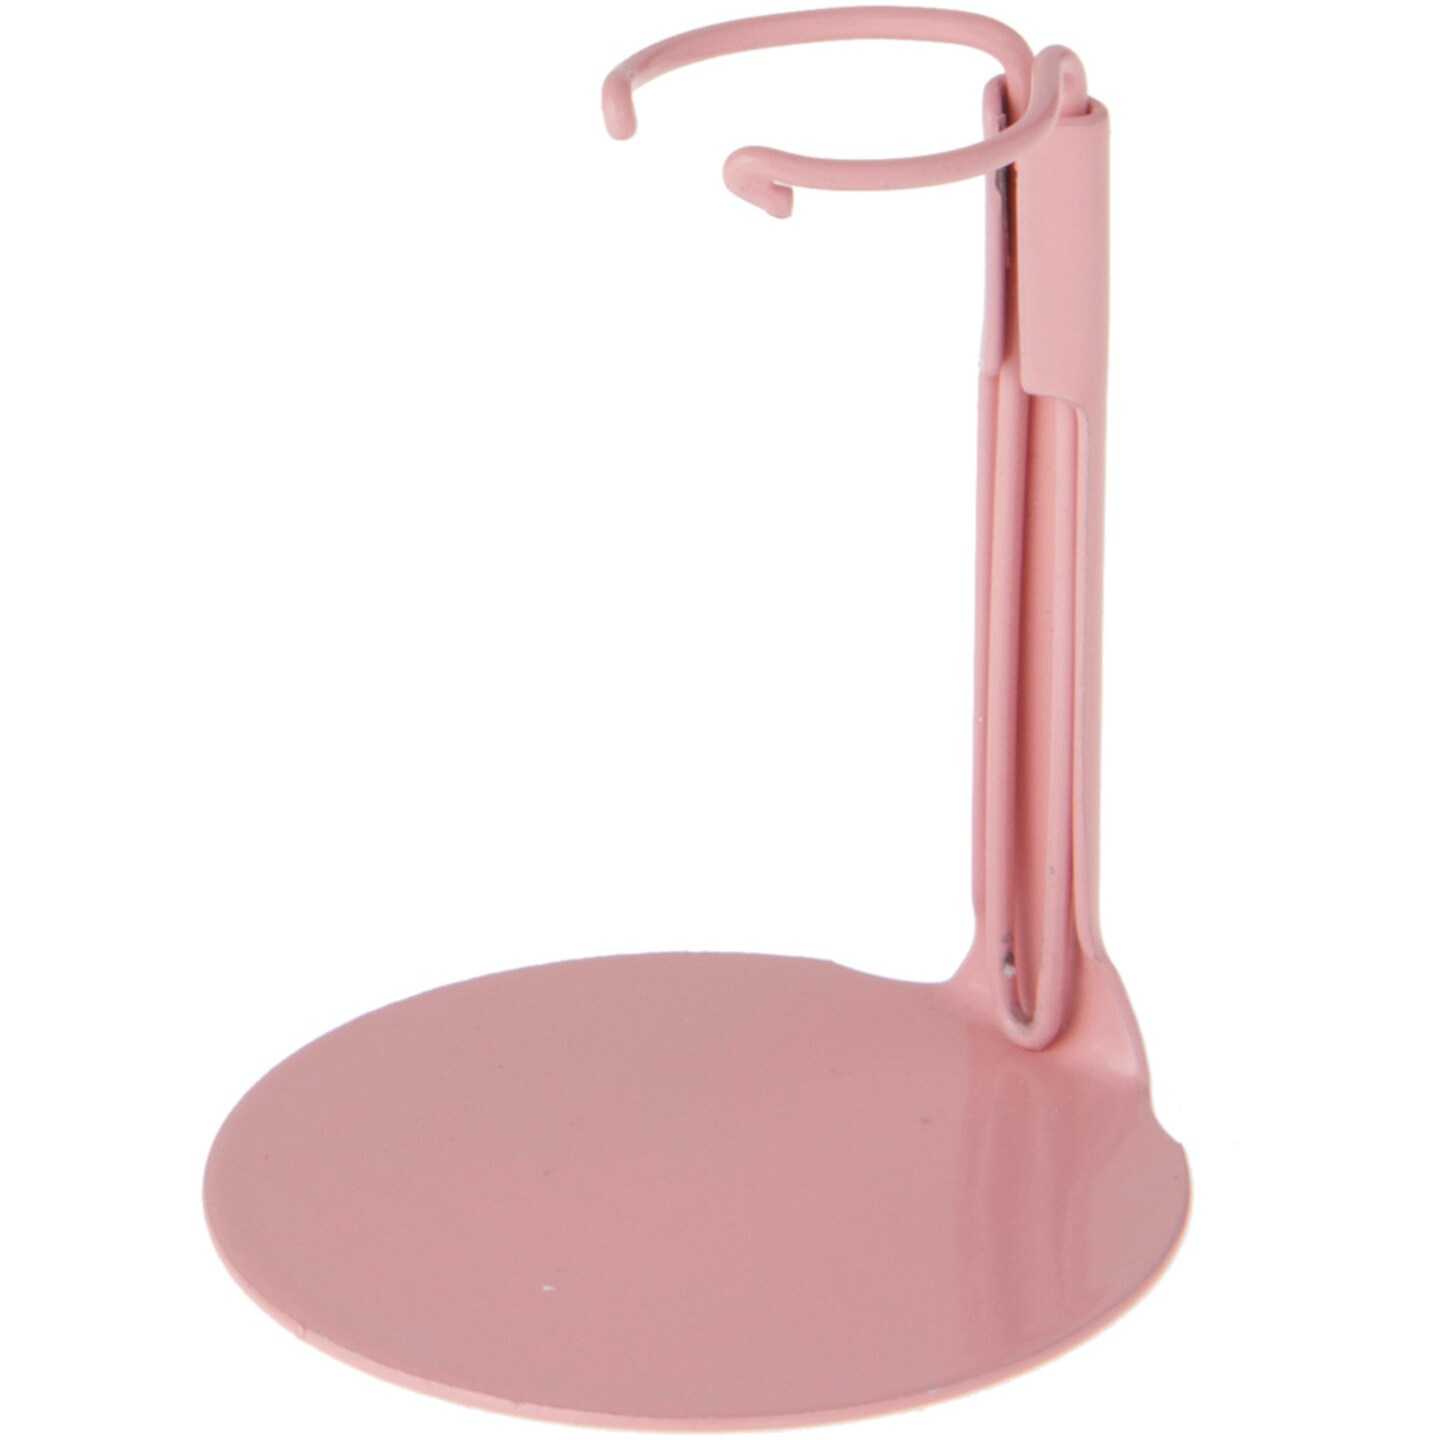 Kaiser 1095 Pink Adjustable Doll Stand, fits 3.5 to 5 inch Dolls or Action Figures, waist width adjusts from 0.625 to 0.75 inches